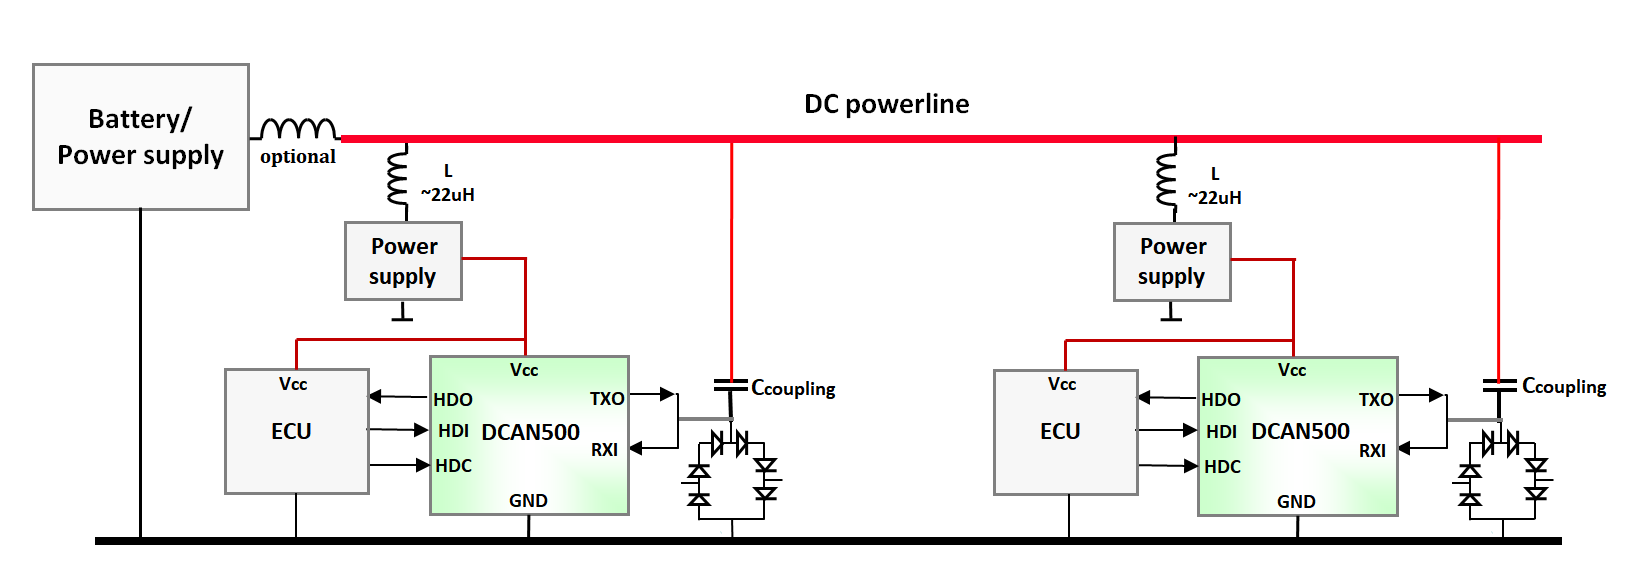 DCAN500 PLC network example